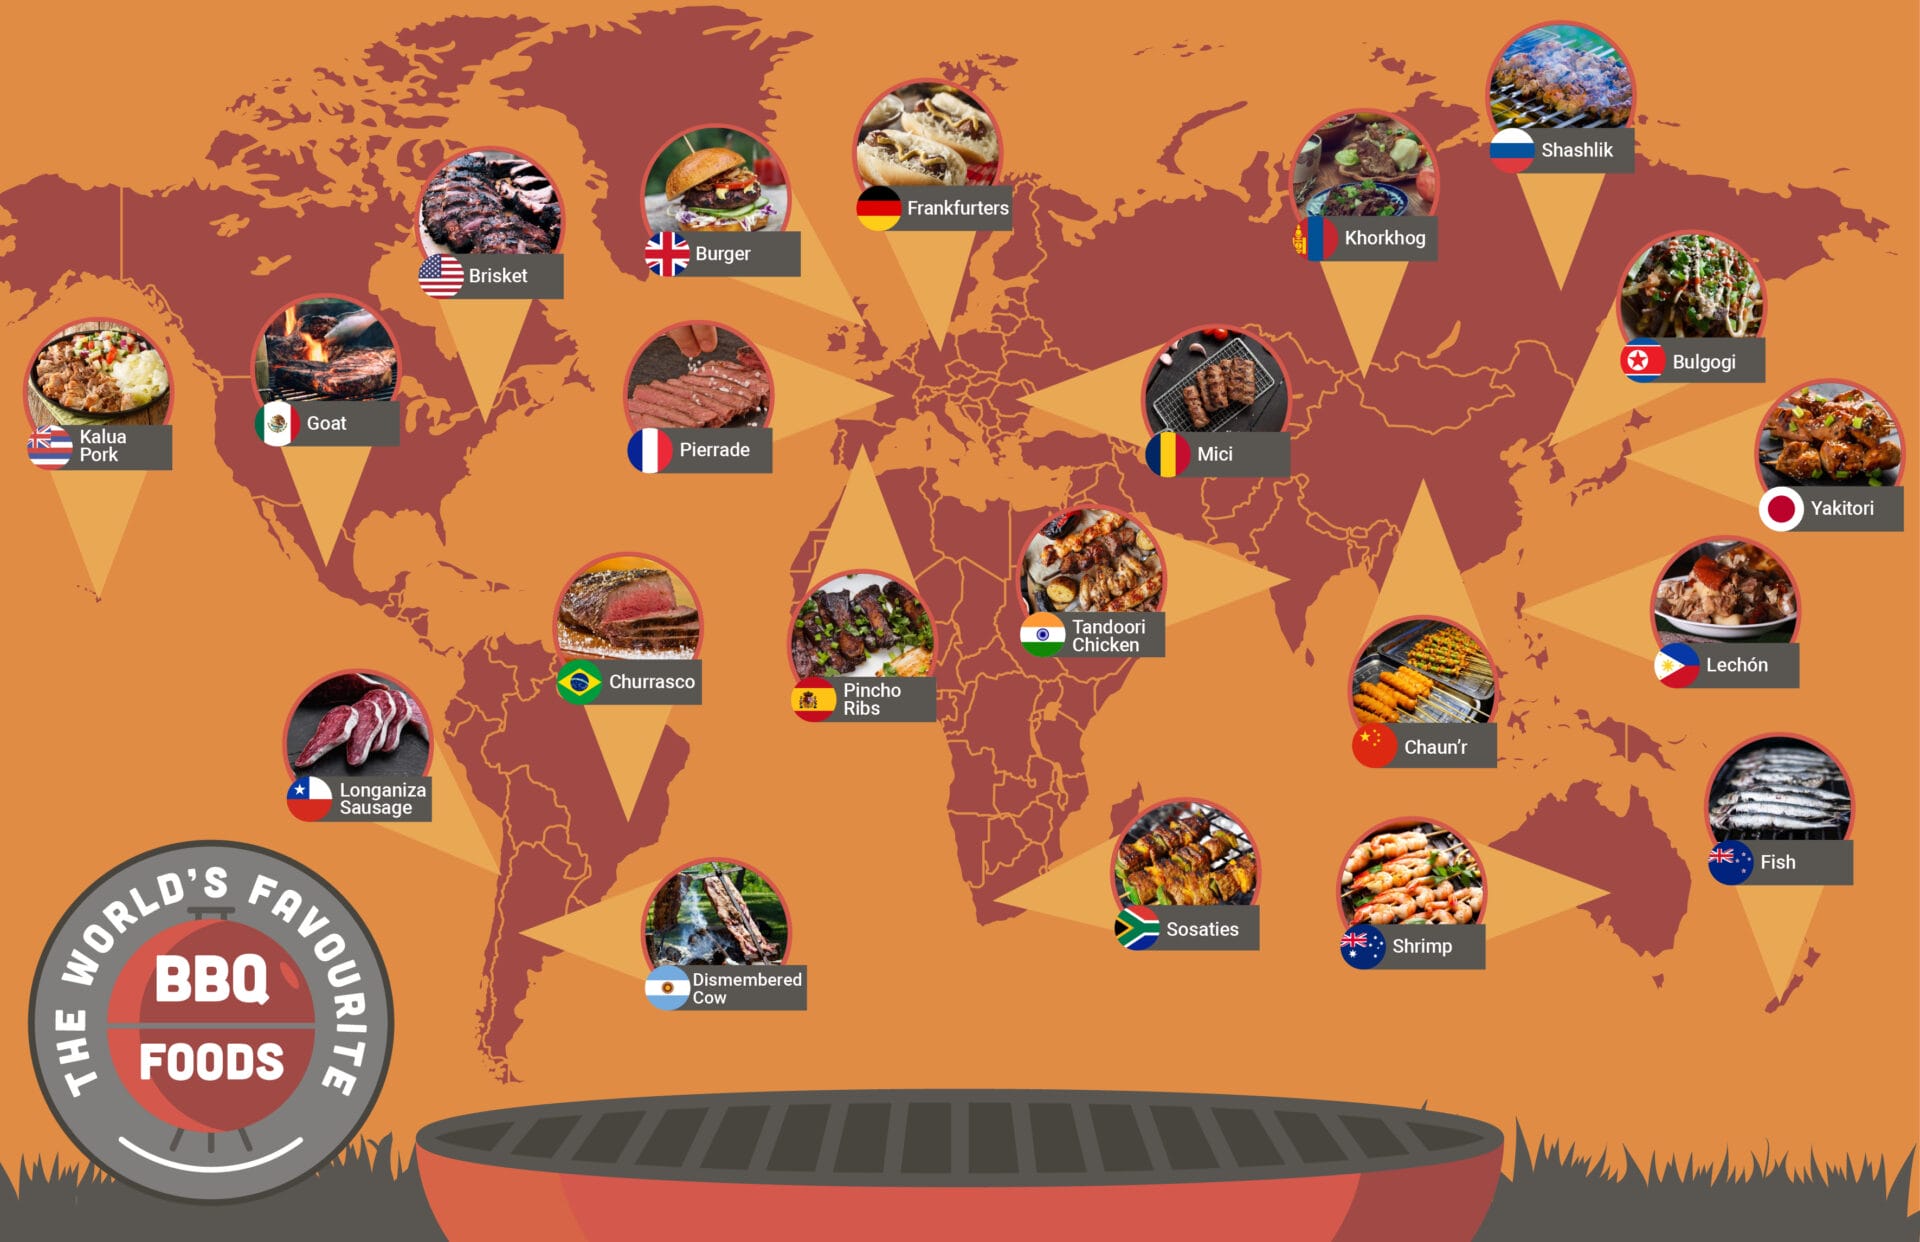 20 Famous Barbecue Dishes From Around the World